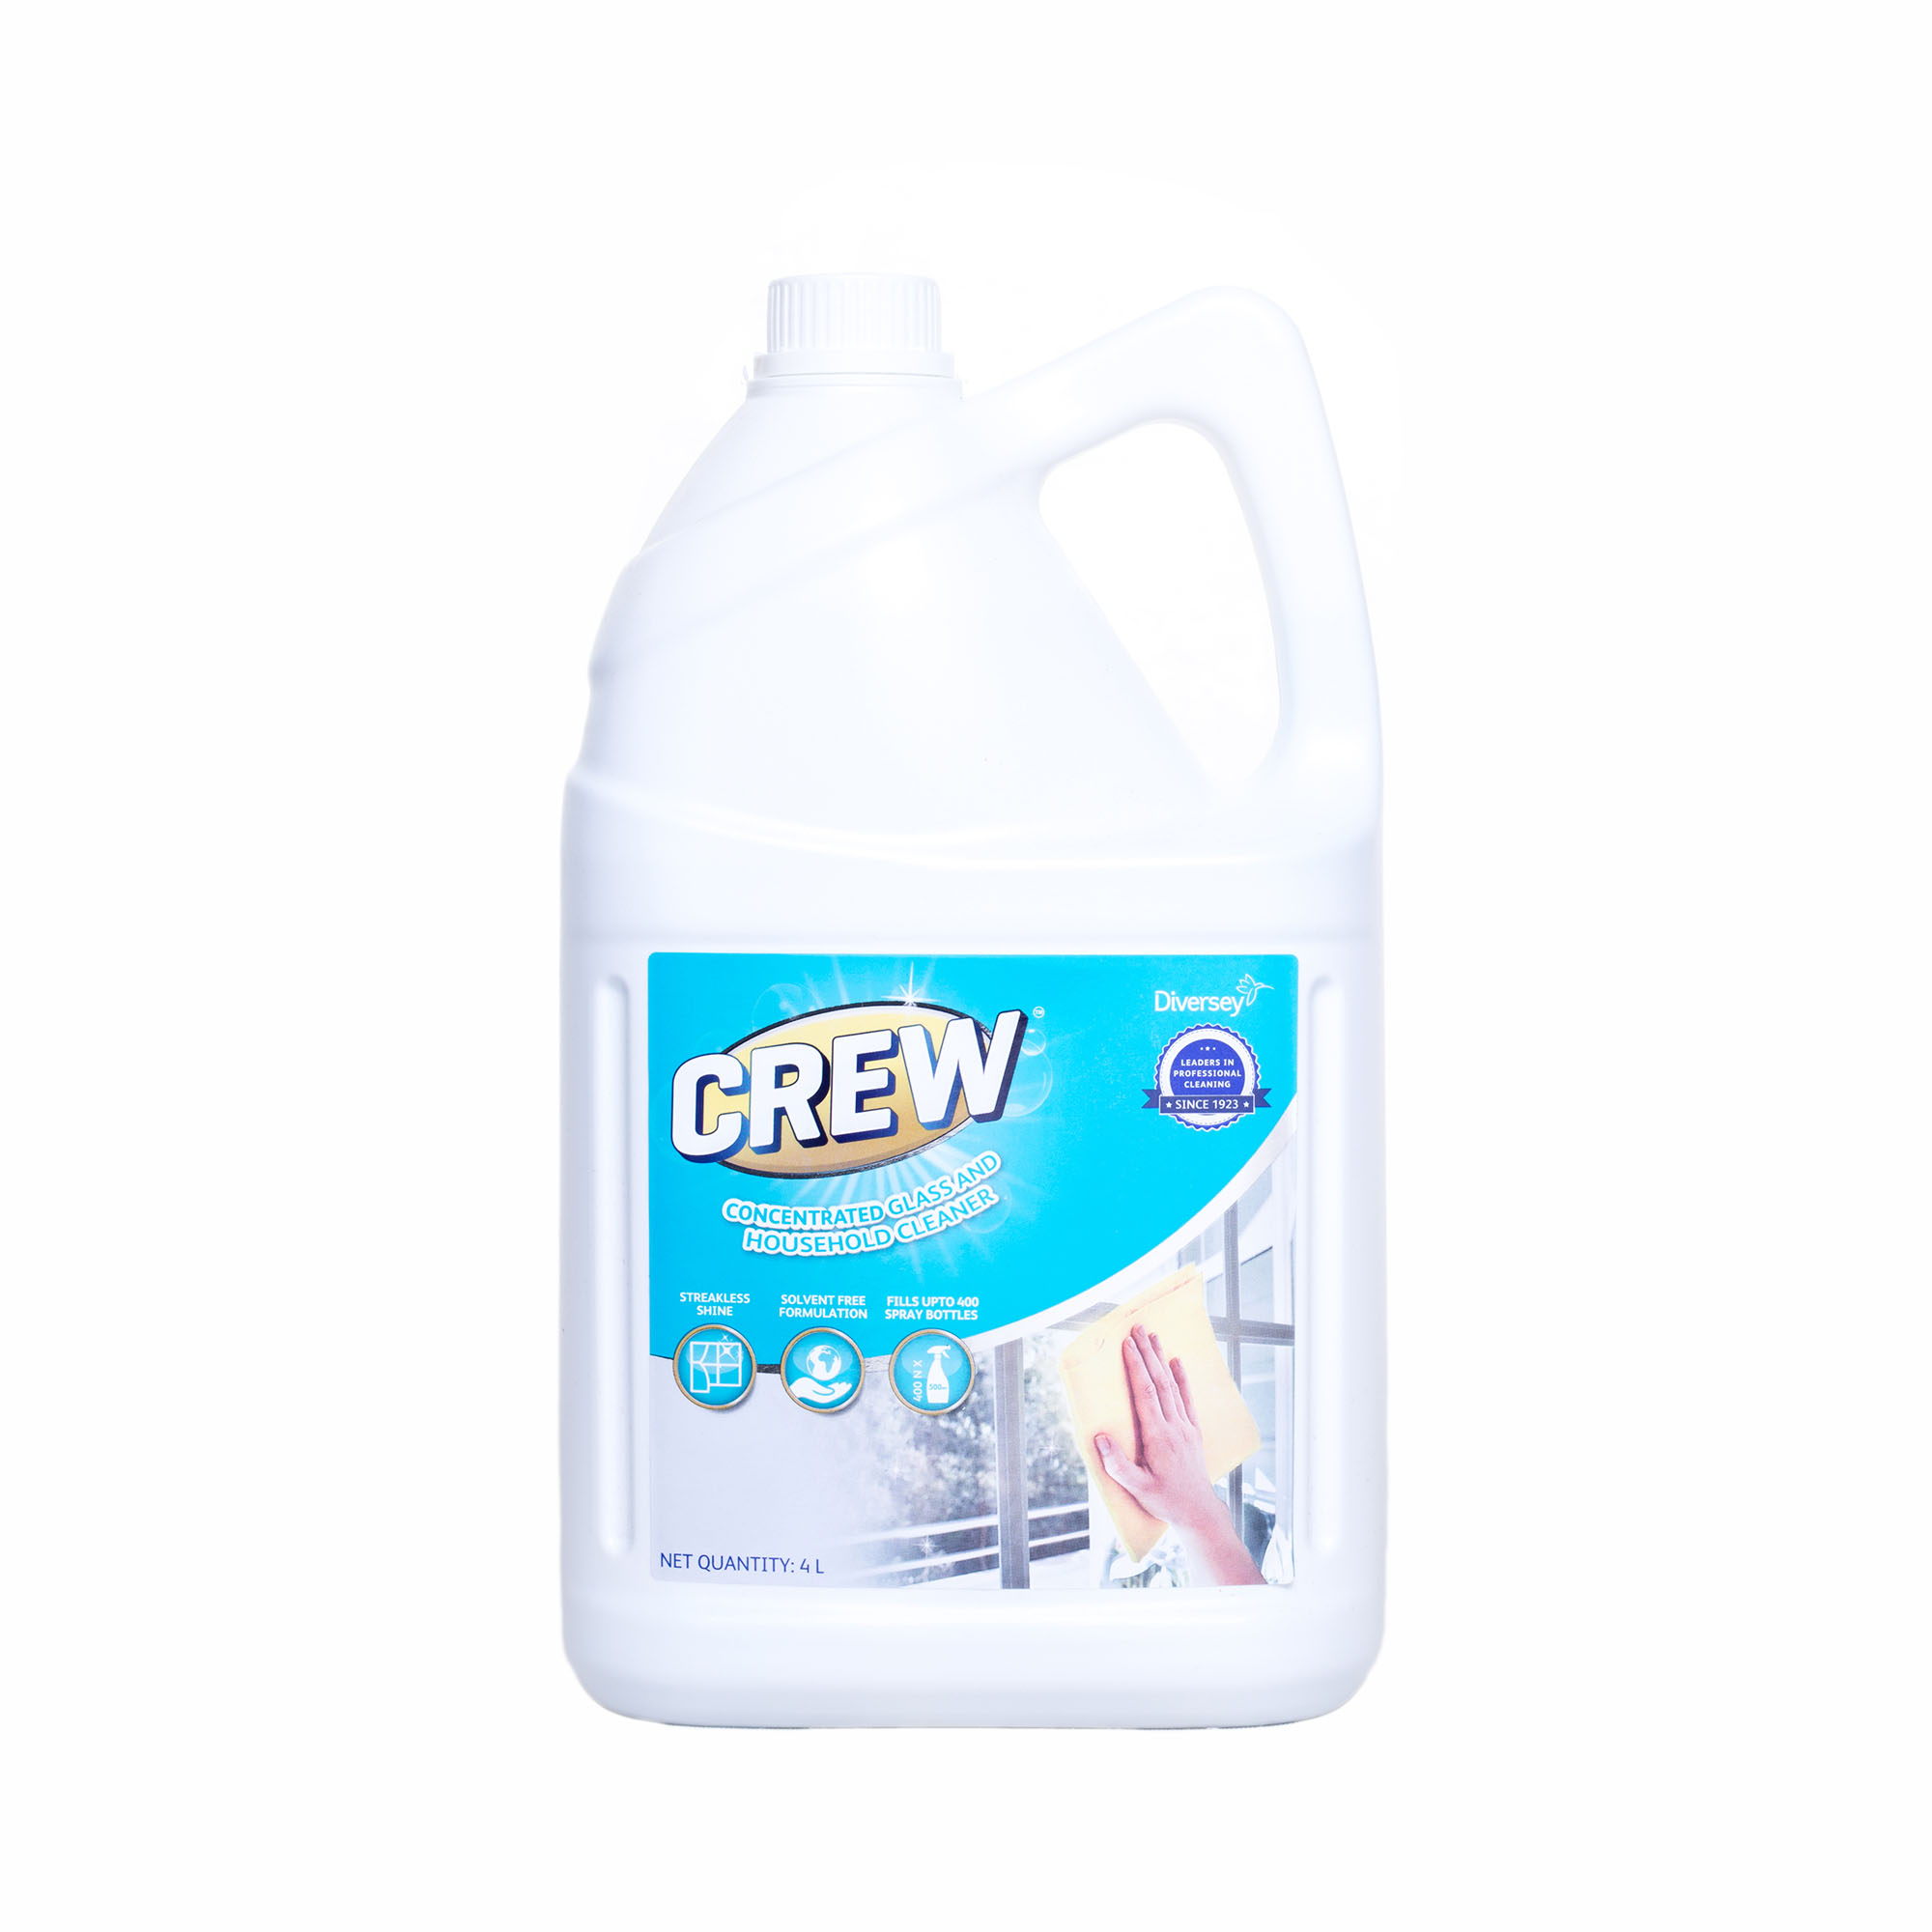 Crew%20Concentrated%20Glass%20and%20Household%20Cleaner%20%28Front%292000x2000.jpg